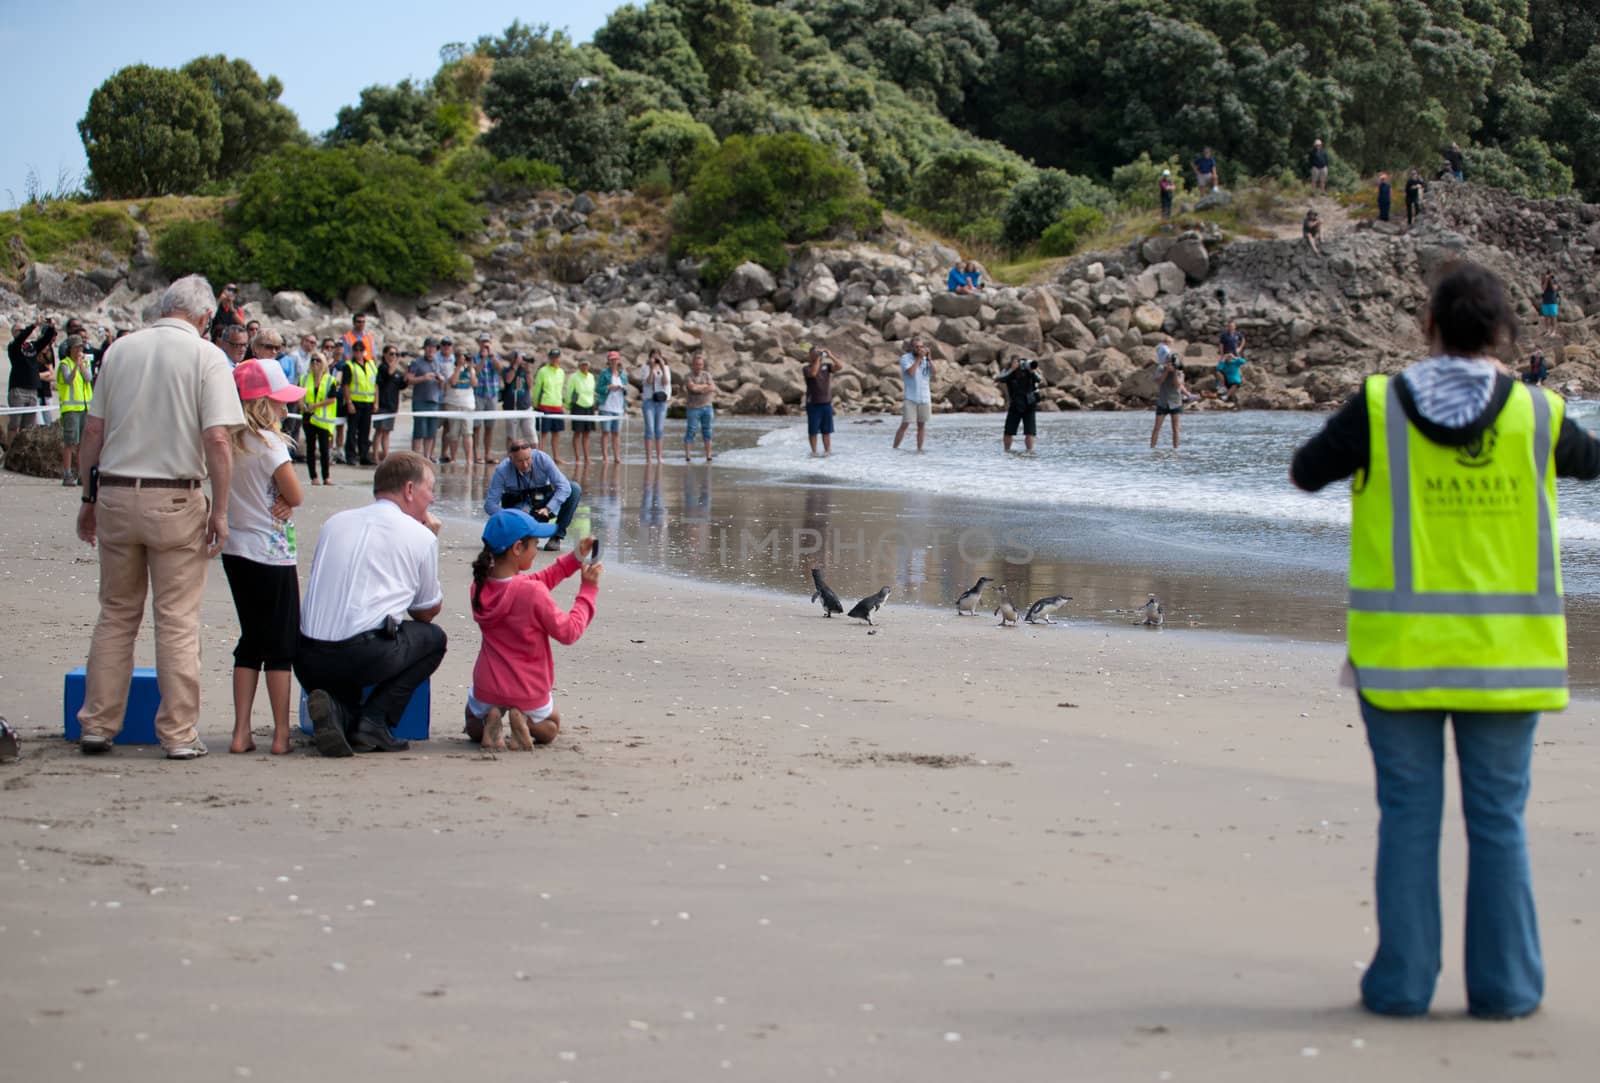 Penguin release watched by crowd. by brians101